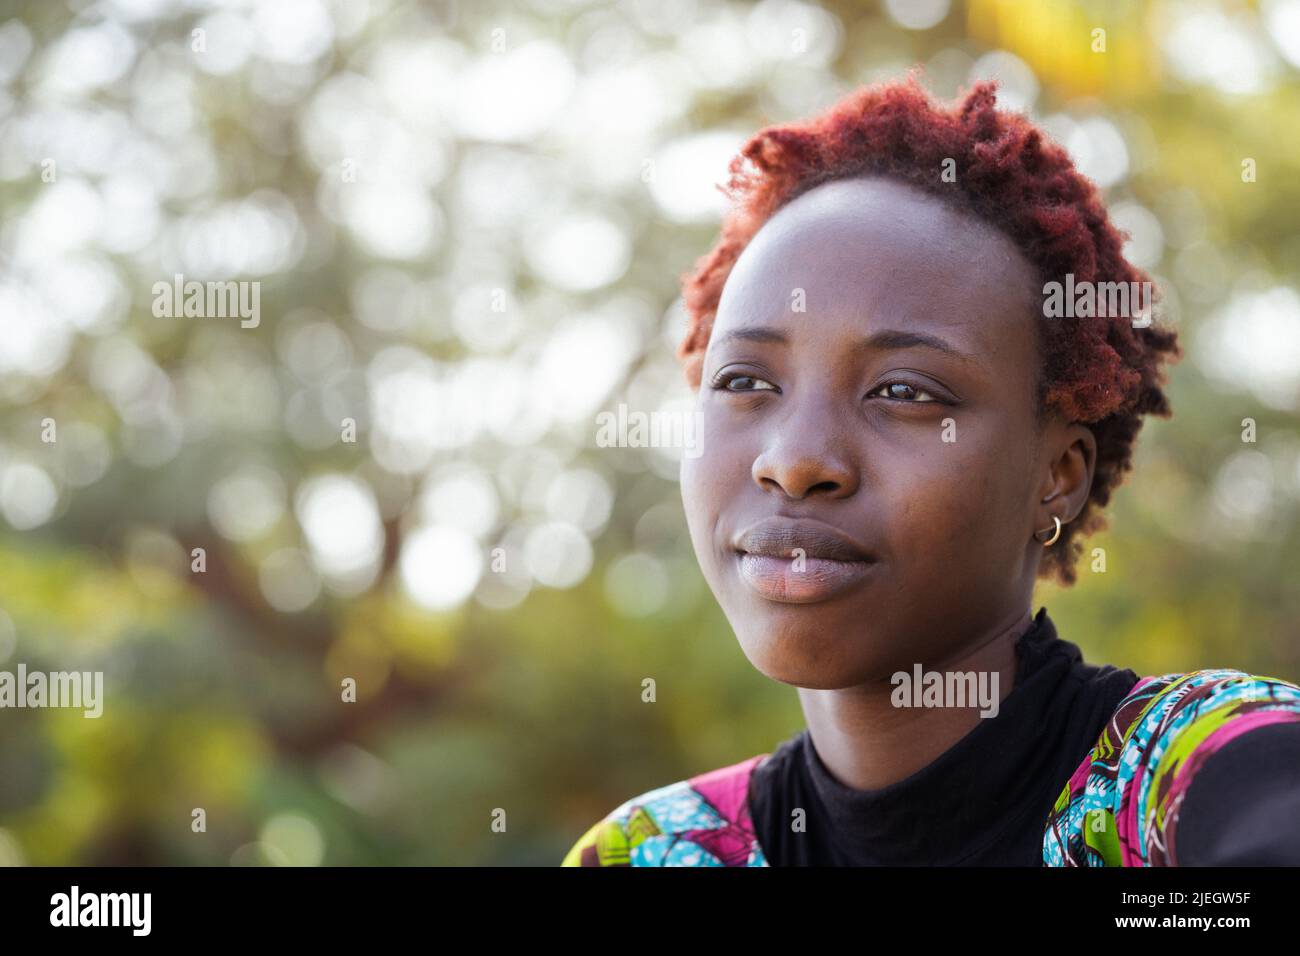 Front view of a melancholy young African teenager in love, dreaming about her favorite movie star Stock Photo